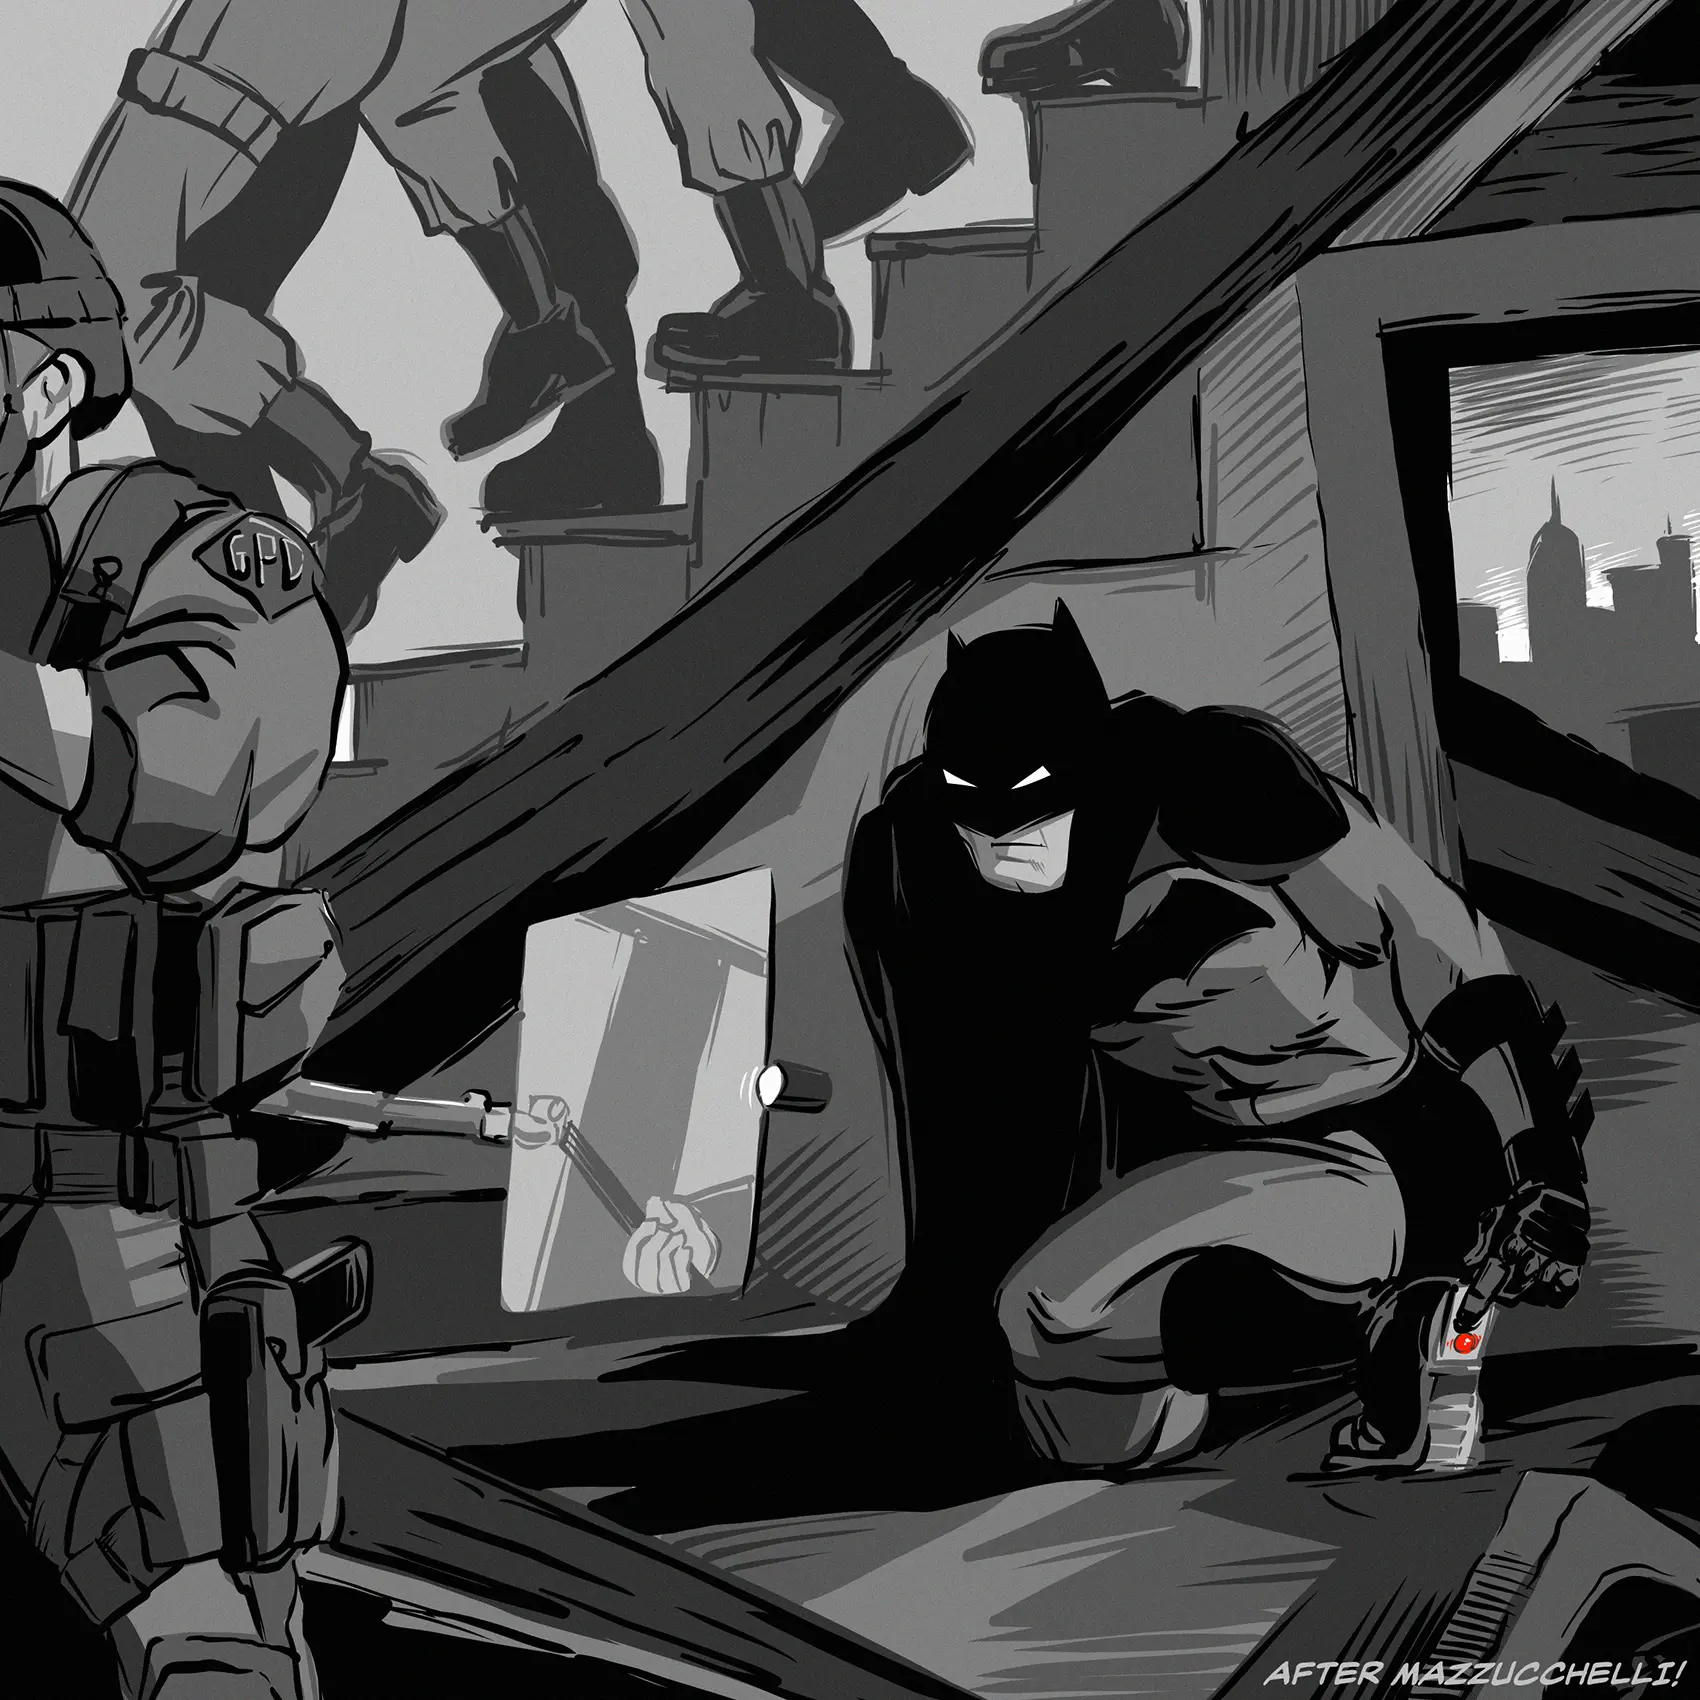 Batman tries to demilitarize the police.